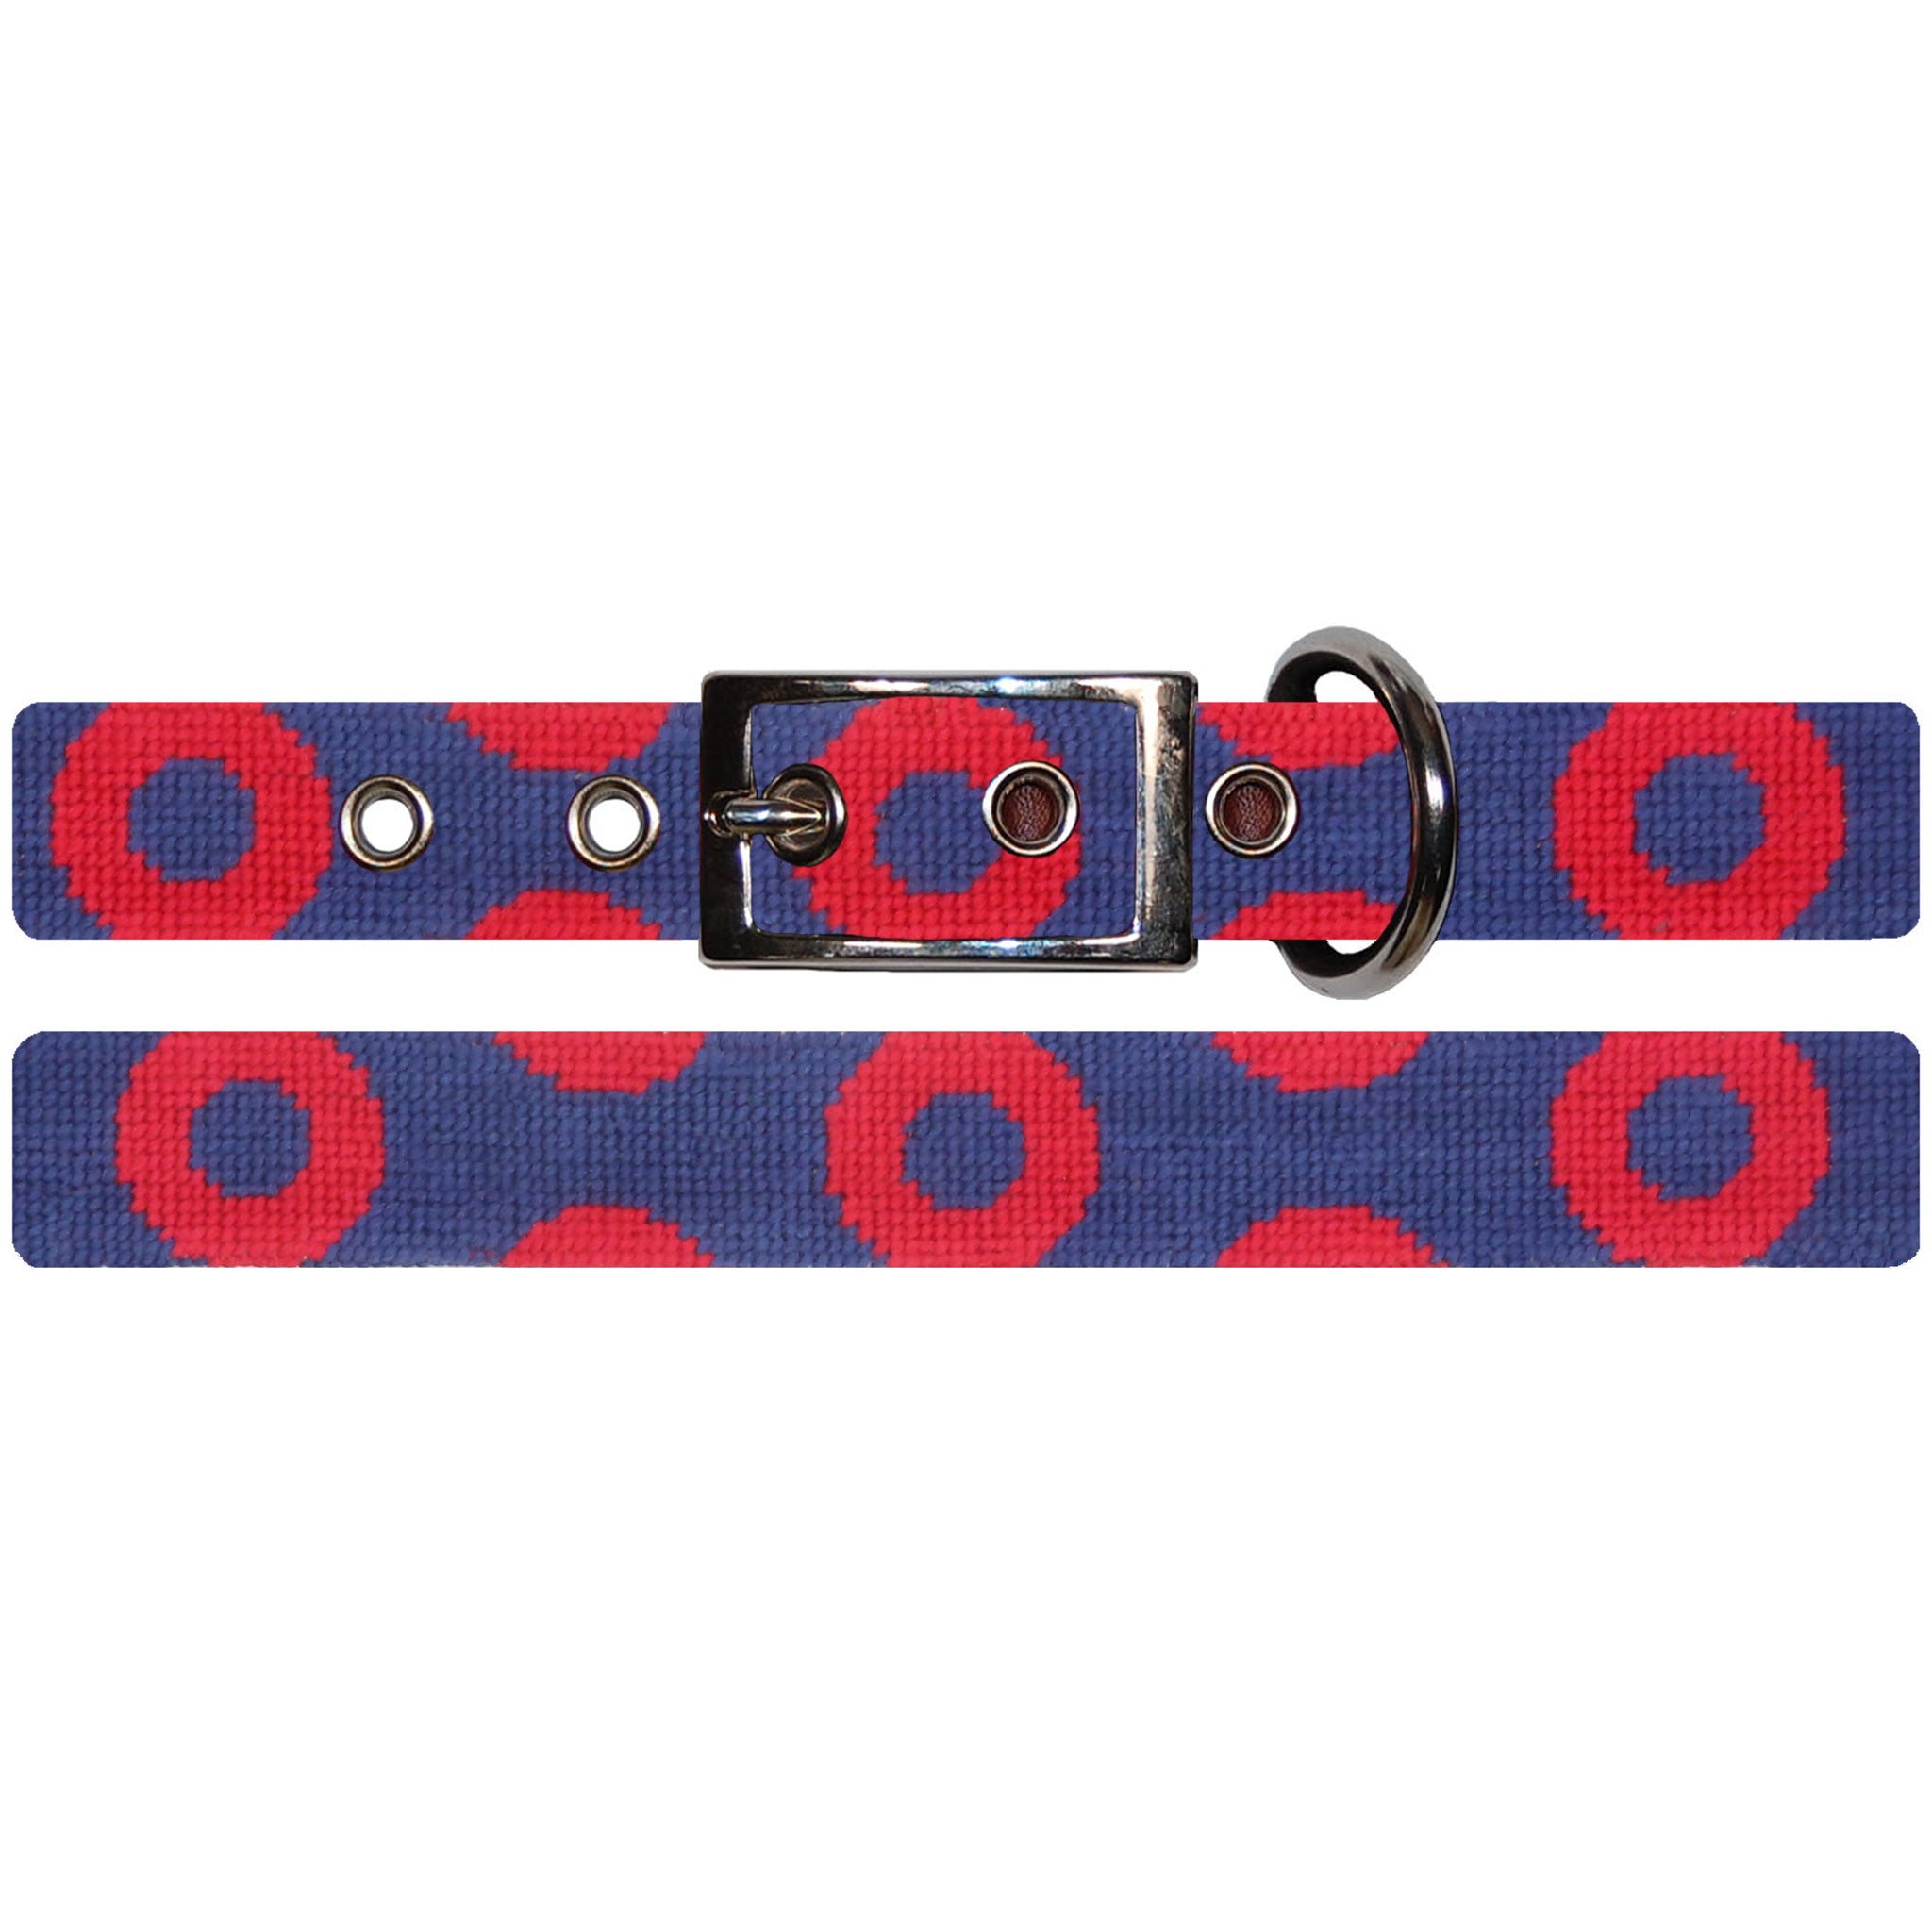 Smathers and Branson The Donut Pattern Needlepoint Dog Collar Classic Navy - Red Donuts  